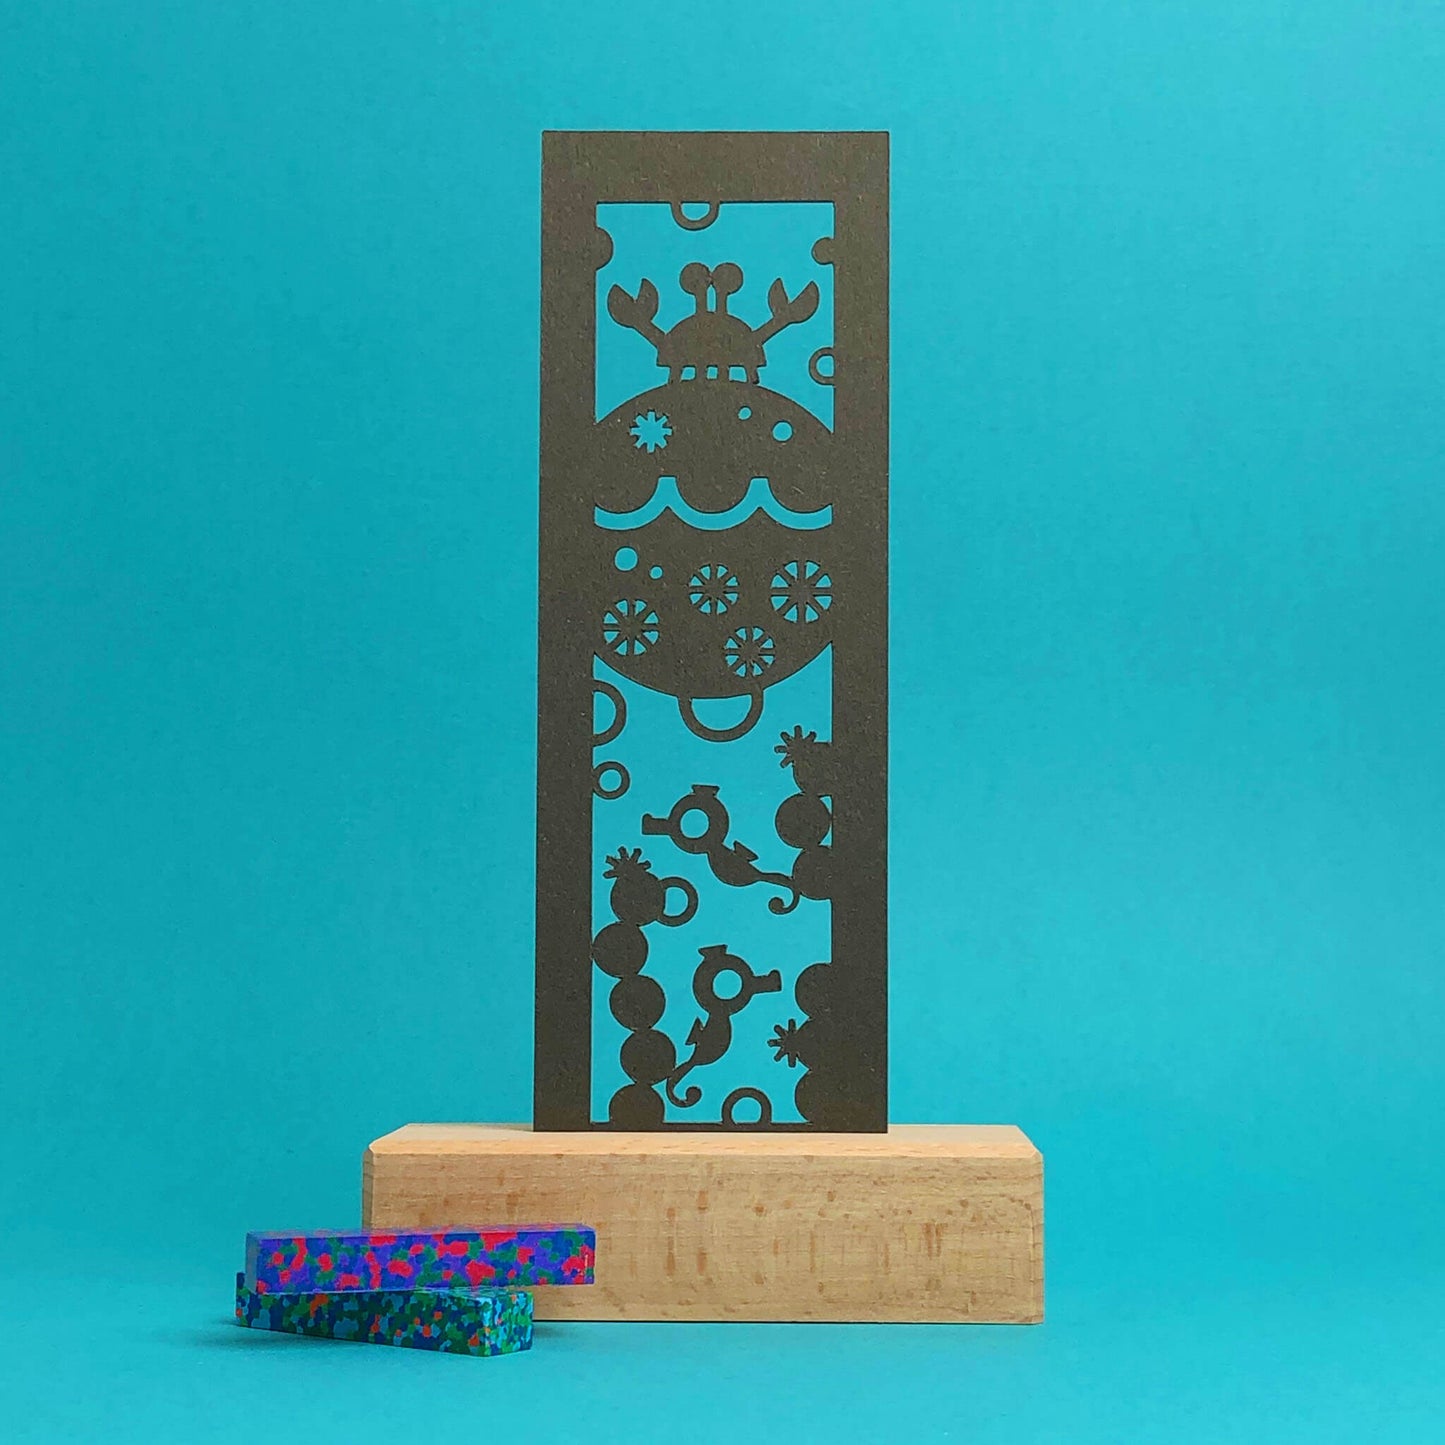 A wooden art display with a brown paper bookmark featuring a cut-out designs of a crab, seahorses, and coral. Two speckled crayons, in shades of blue, green, and red, are placed beside the display against a blue background.